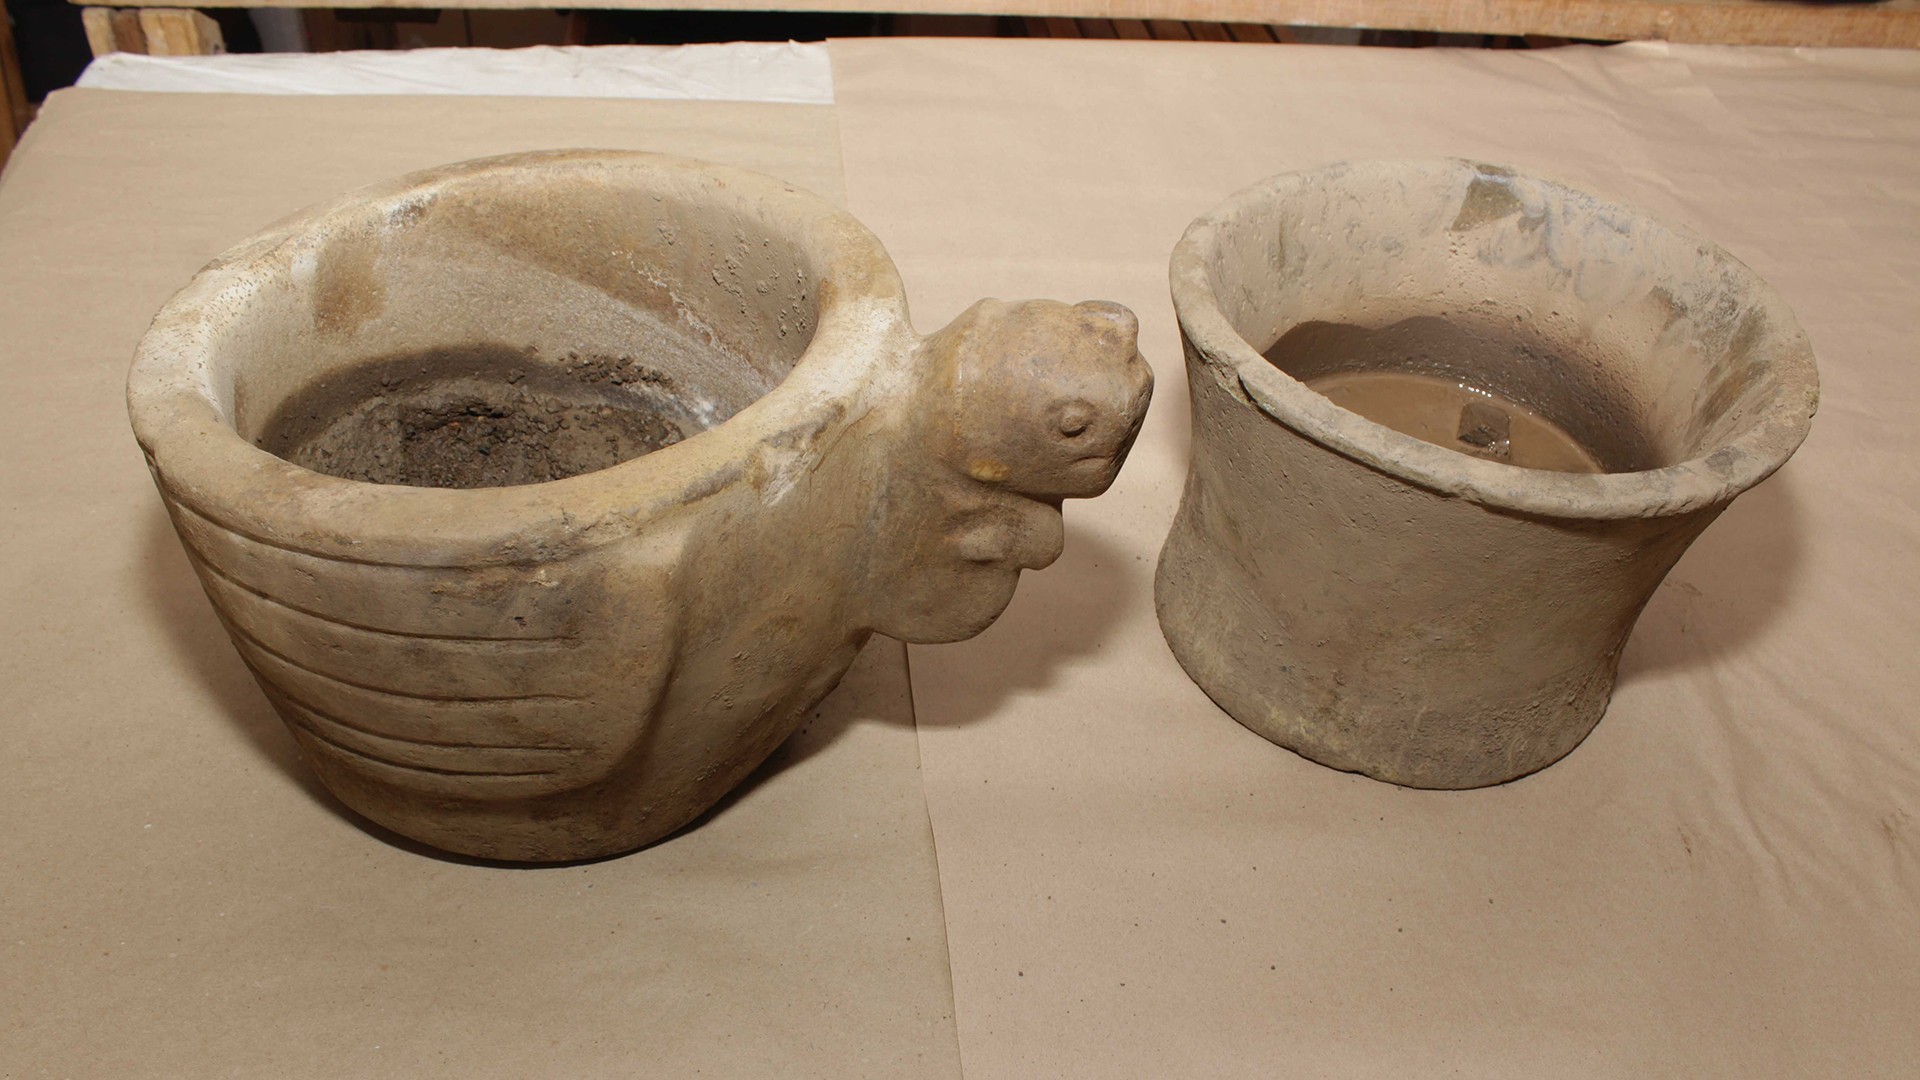 Two stone bowls, one decorated with the head and wings of an Andean condor, were found in a gallery within the hidden Chavín de Huántar temple complex.